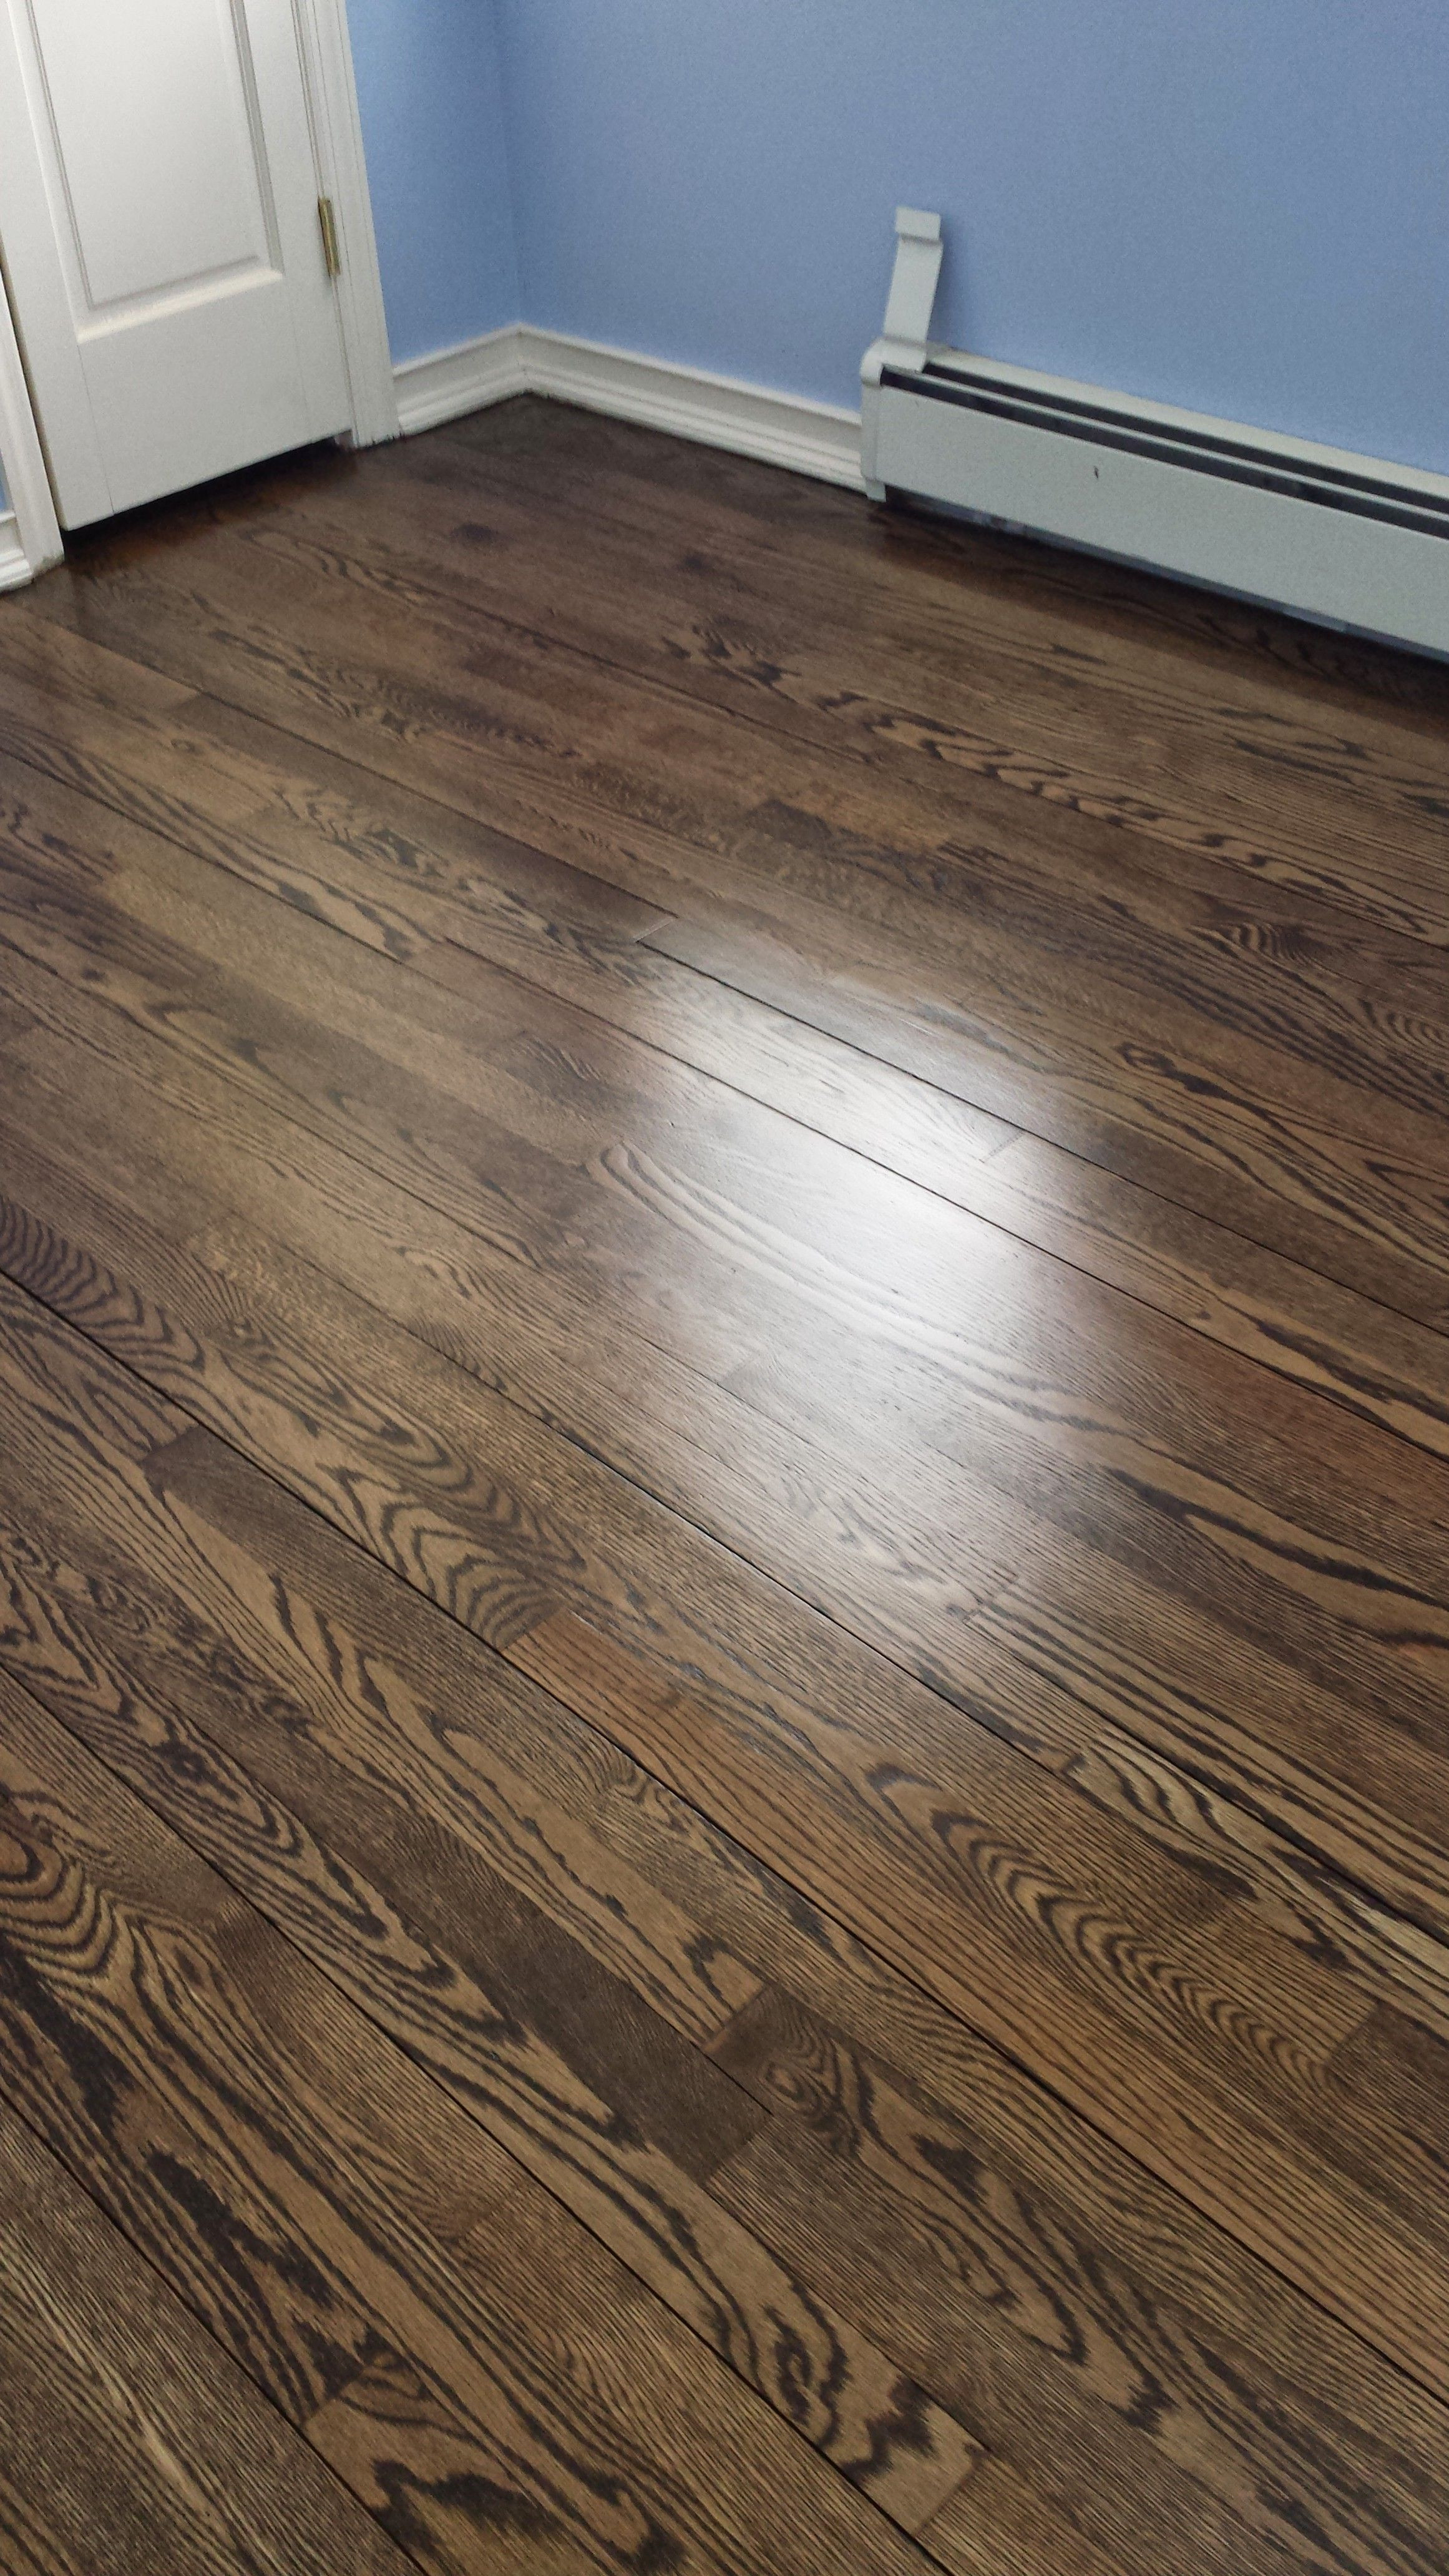 hardwood floor in basement of 40 hardwood flooring pros and cons concept throughout hardwood floor refinishing is an affordable way to spruce up your space without a full replacement